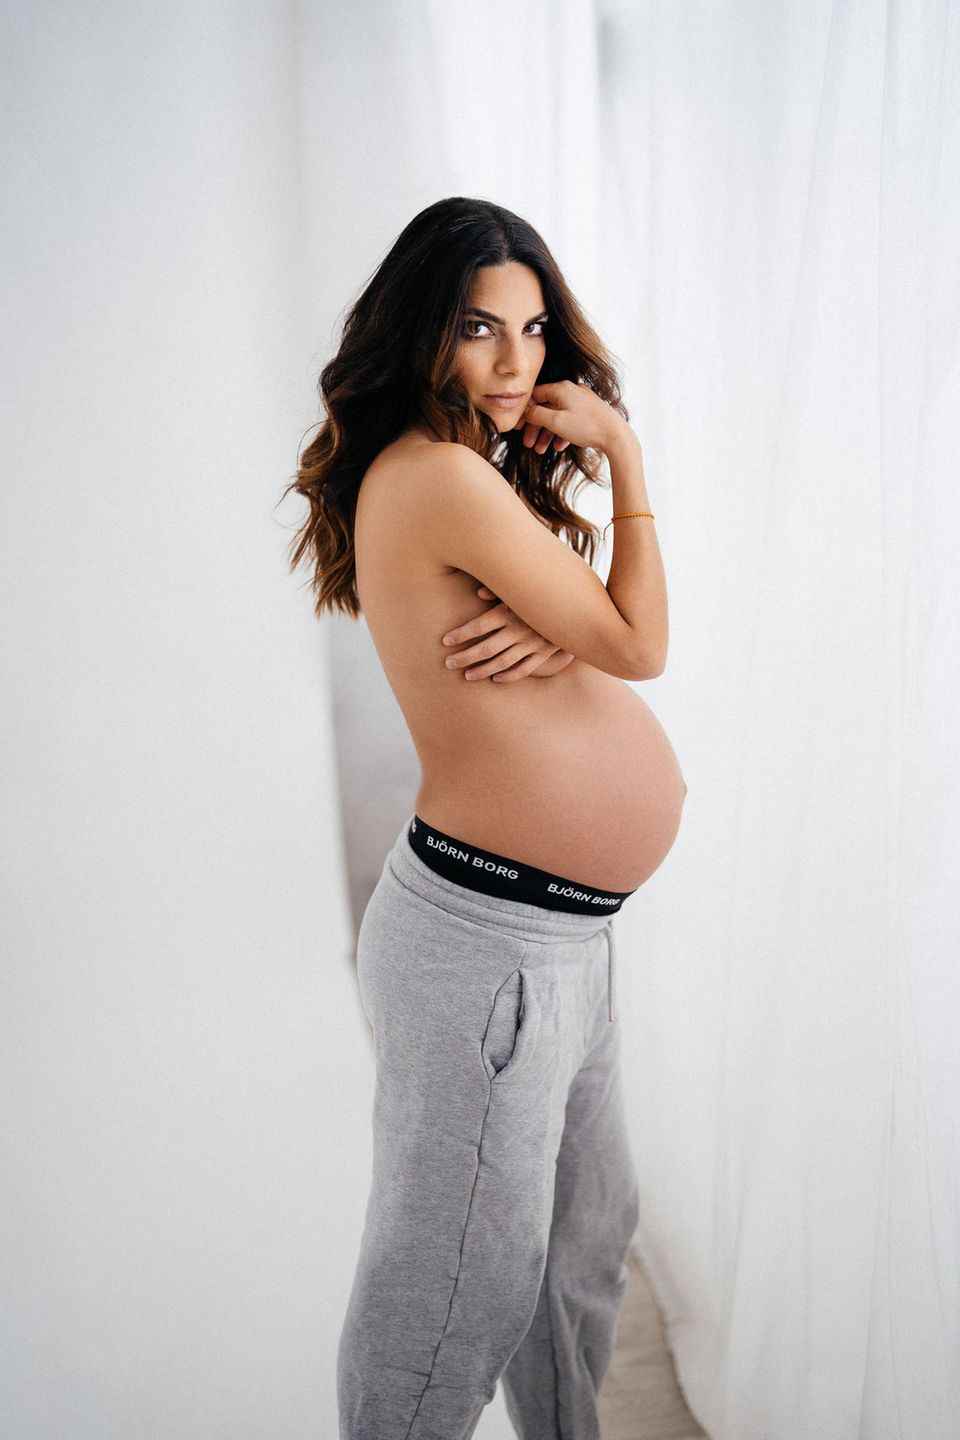 Dressed only in jogging pants, Lilli Hollunder puts her big baby bump in the limelight.